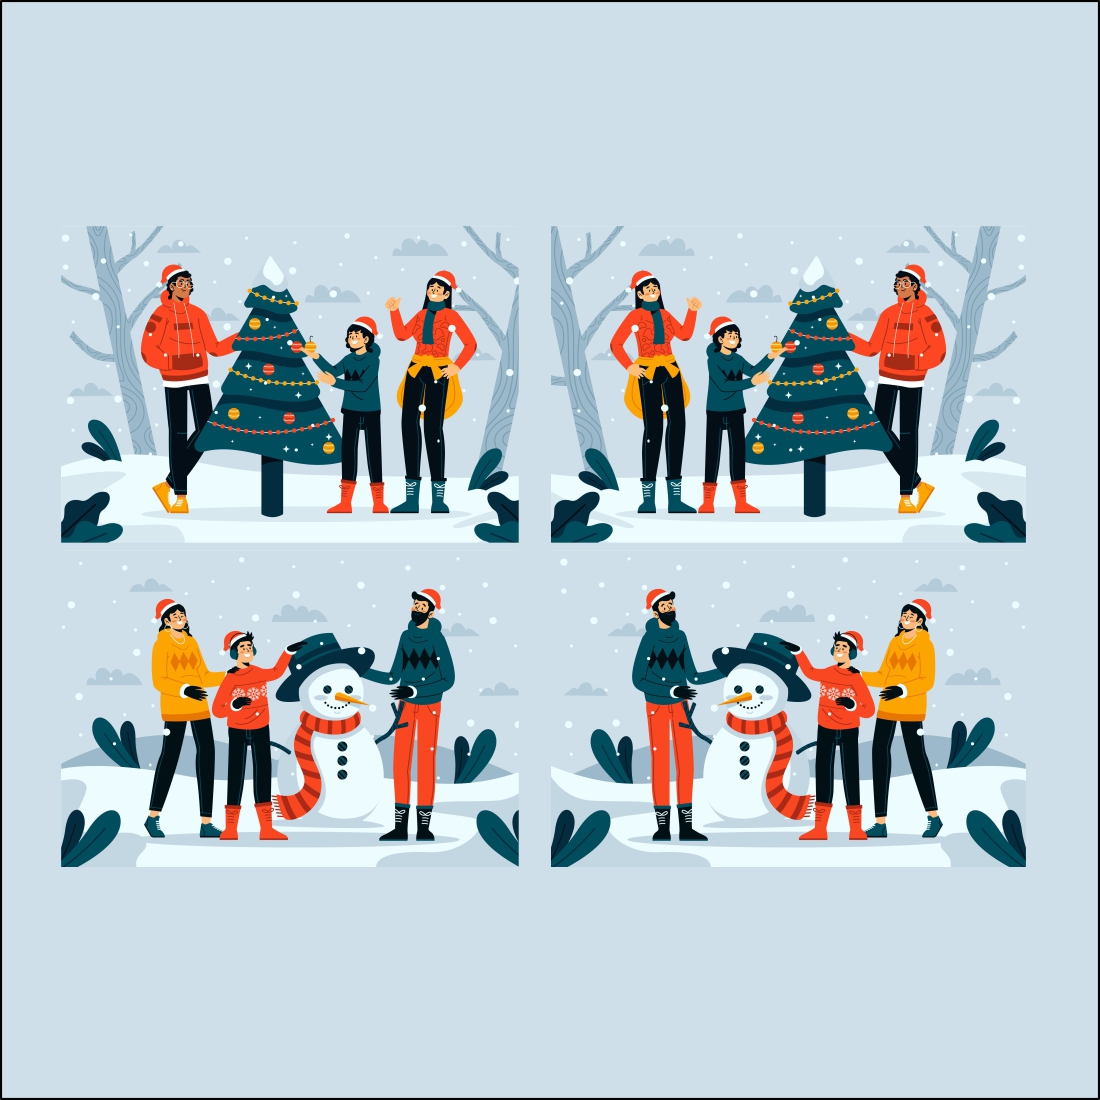 Christmas Scene with Snowman Decoration Design cover image.